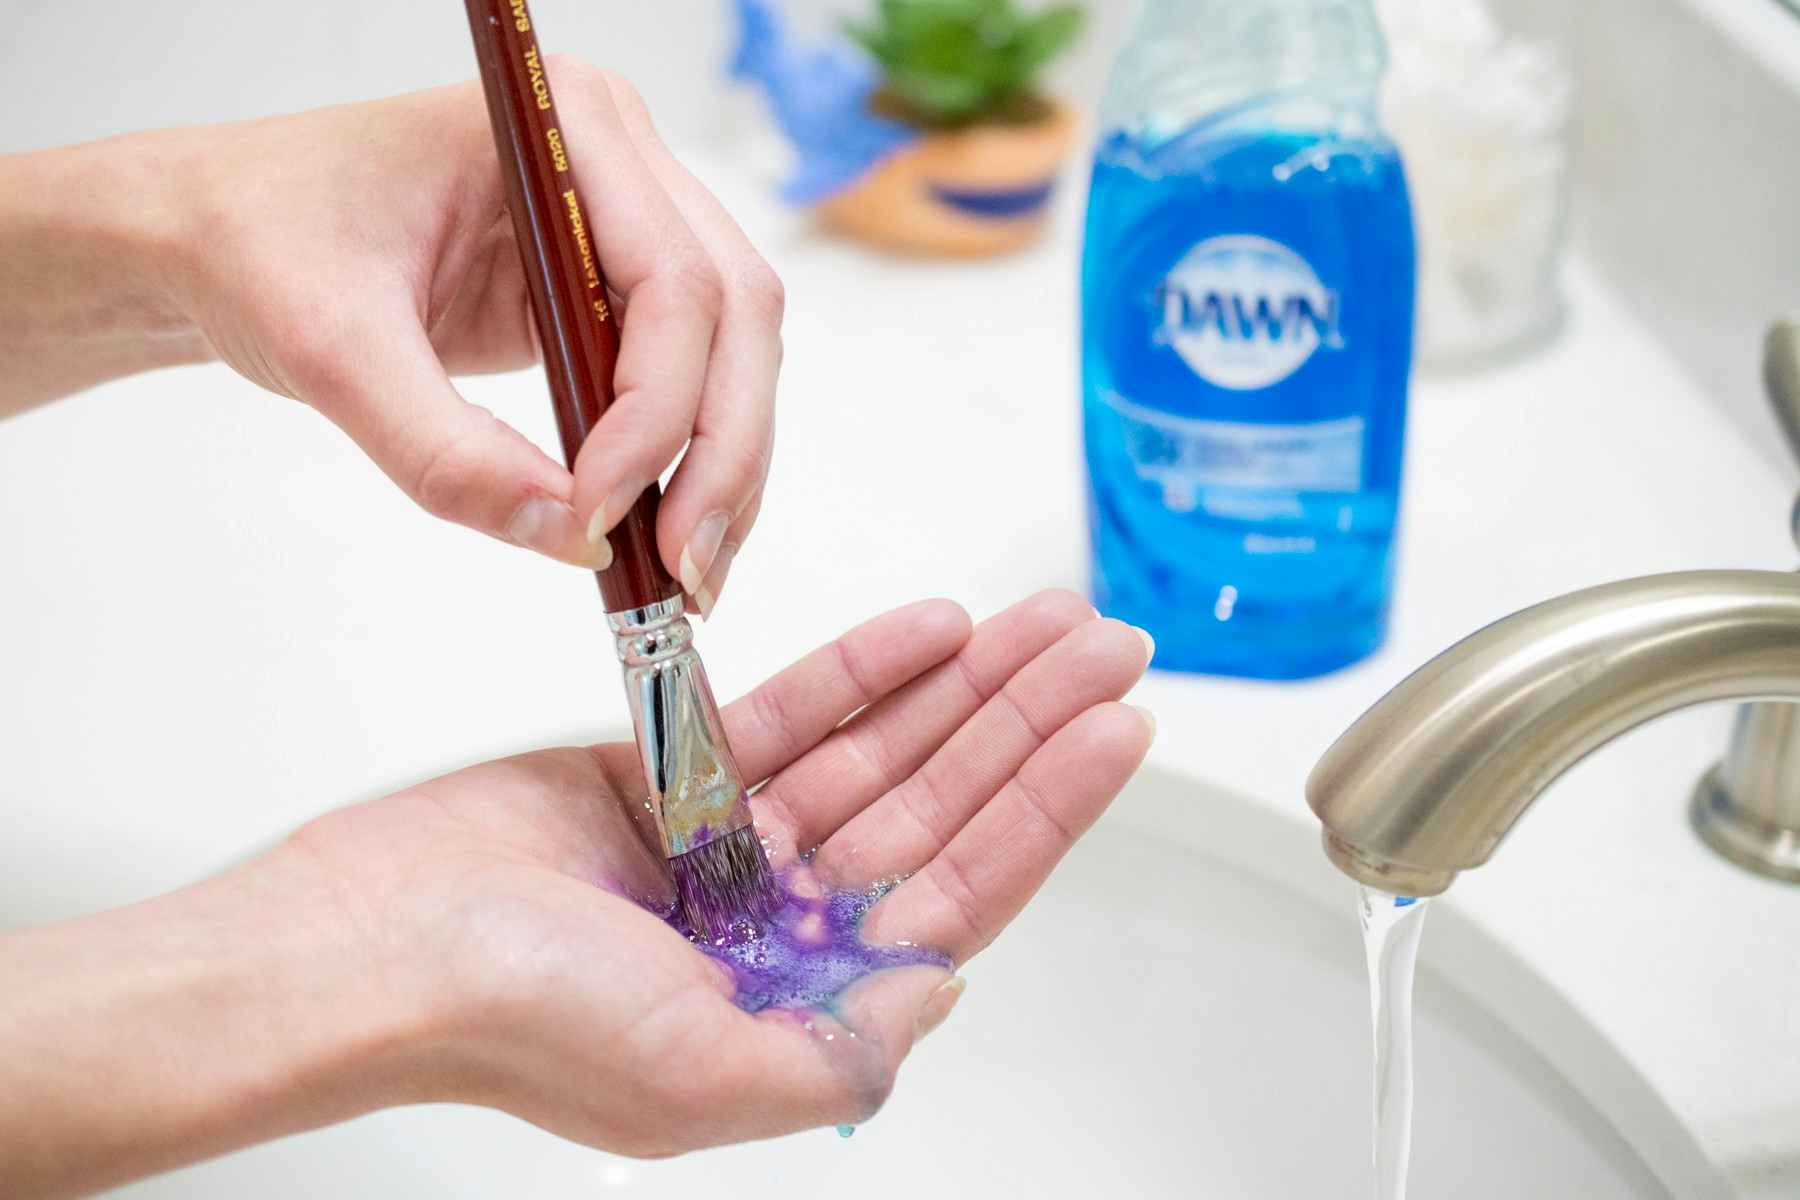 https://prod-cdn-thekrazycouponlady.imgix.net/wp-content/uploads/2019/06/20190621-kcl-dawn-dish-soap-hacks-clean-paintbrushes-02-1561423678.jpg?auto=format&fit=fill&q=25